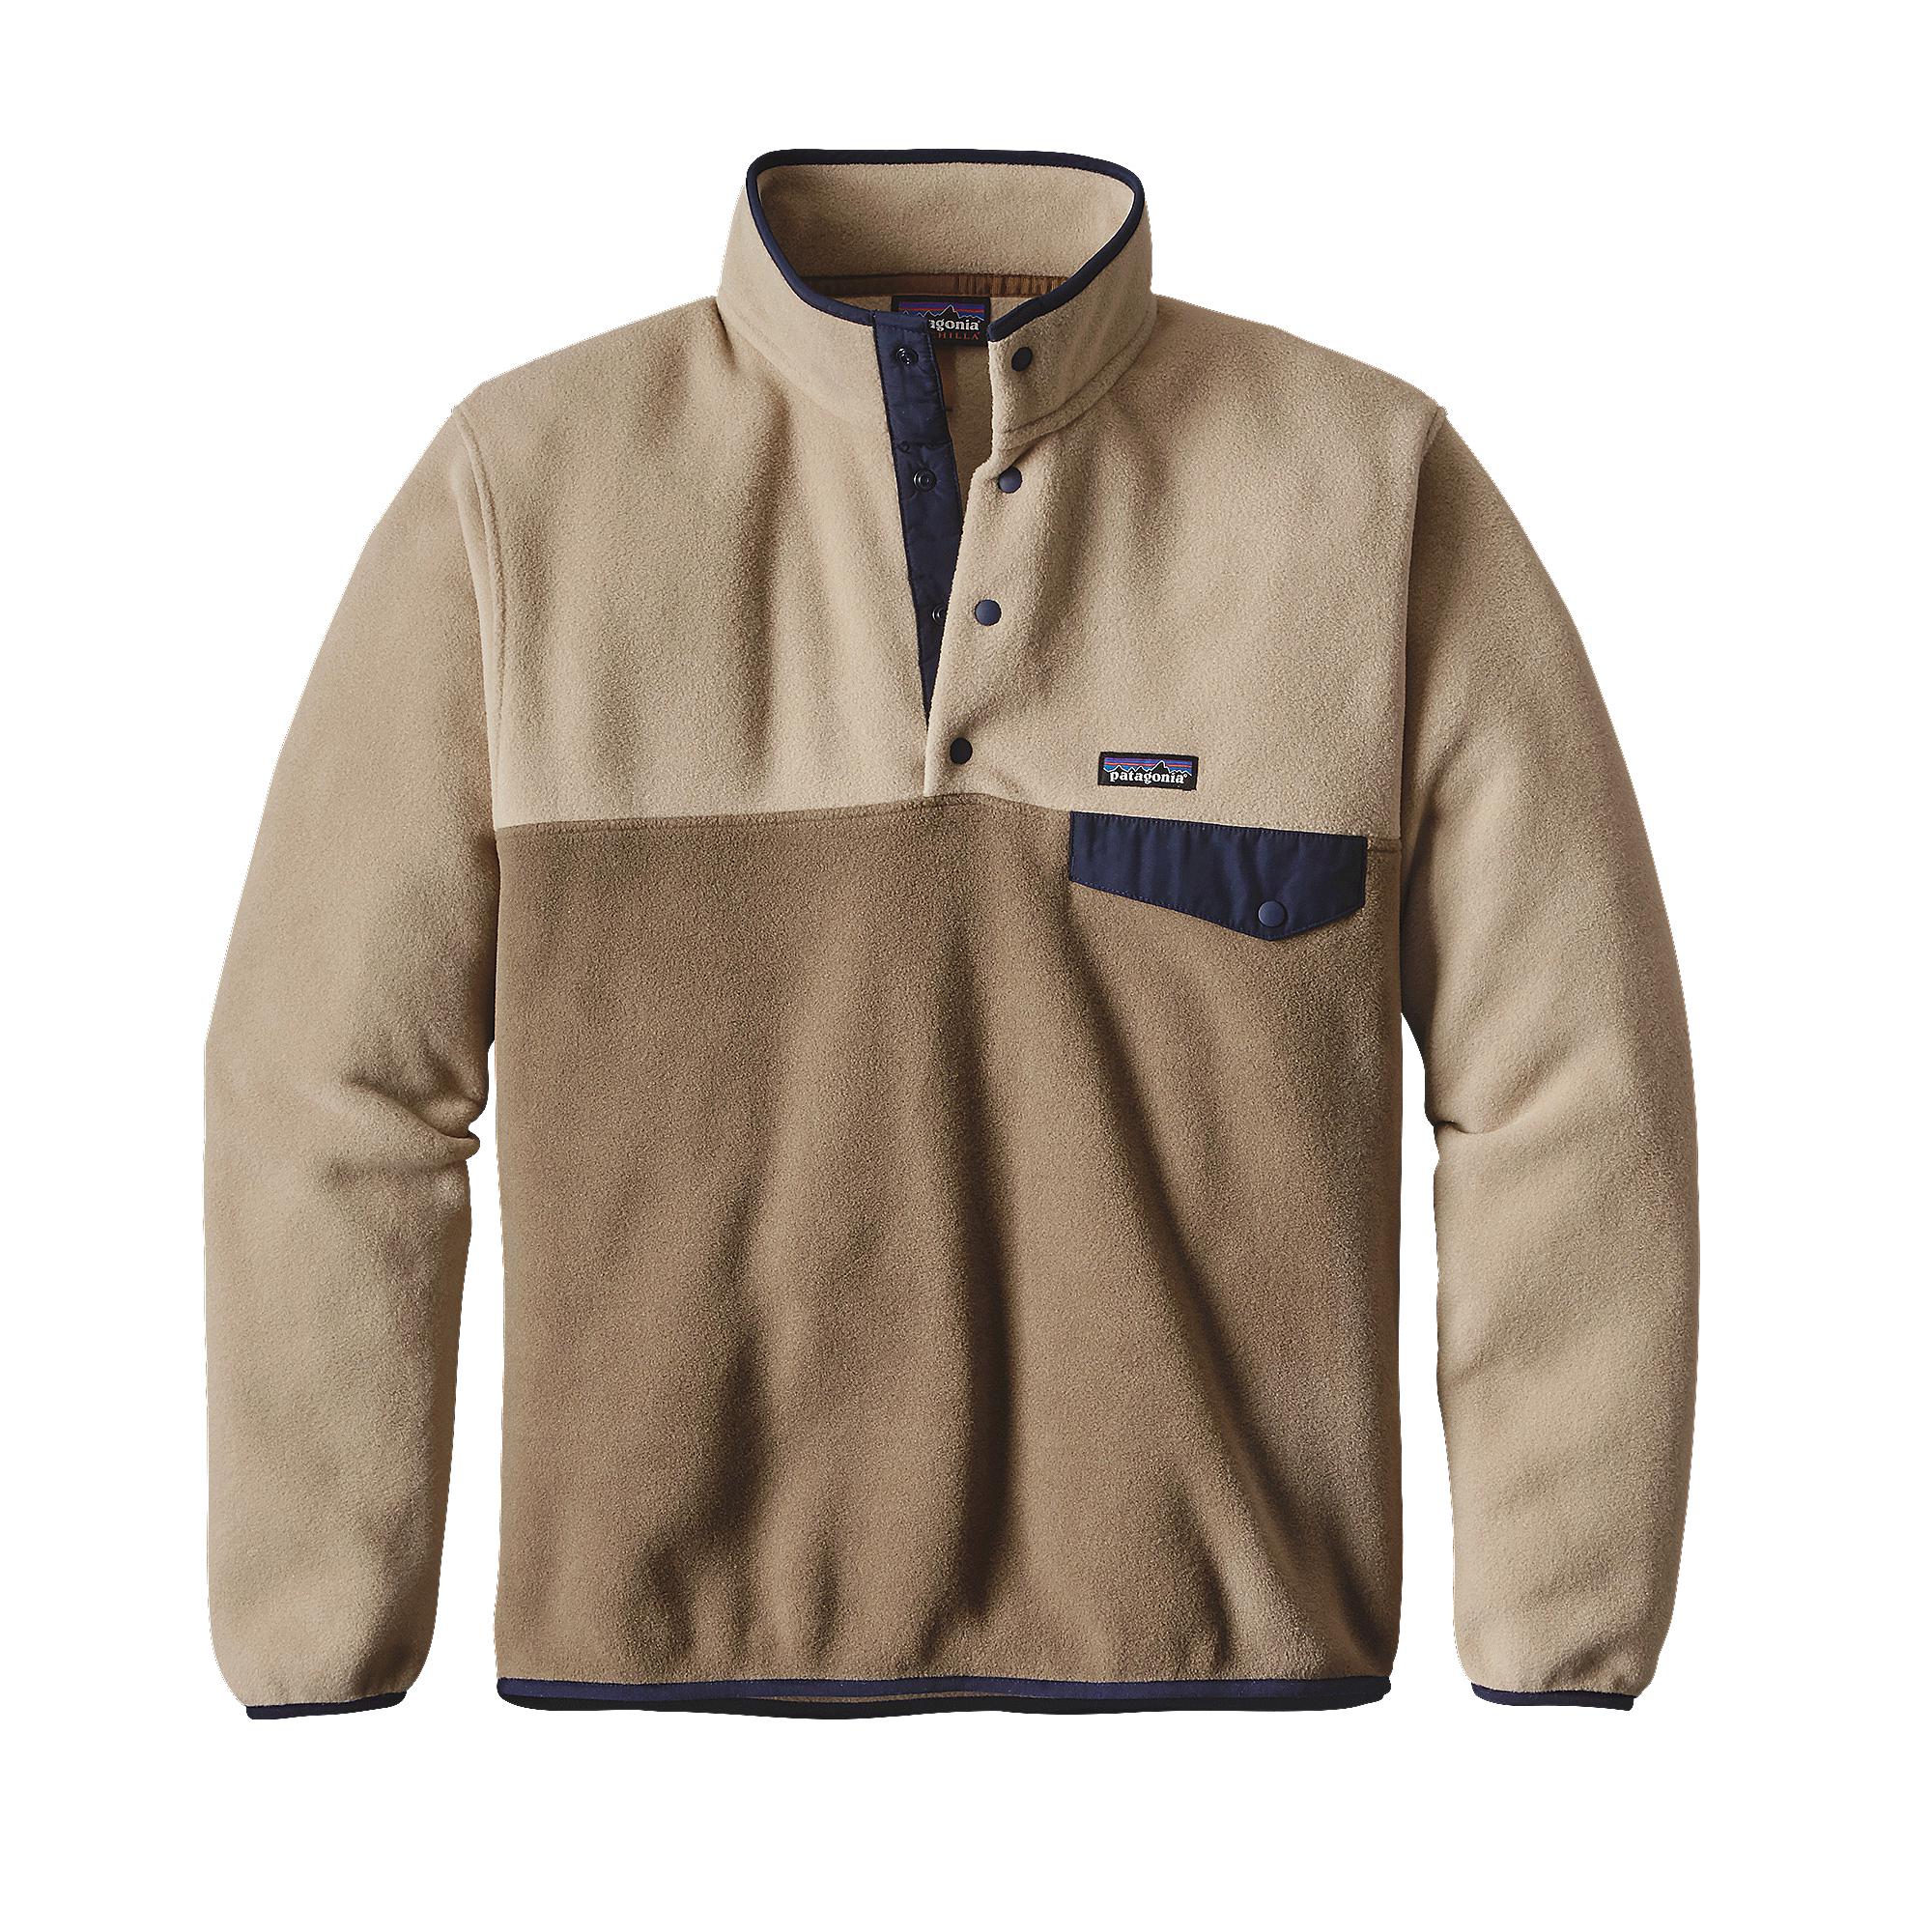 Which Patagonia fleece jacket is the best fleece jacket for you? - Discover